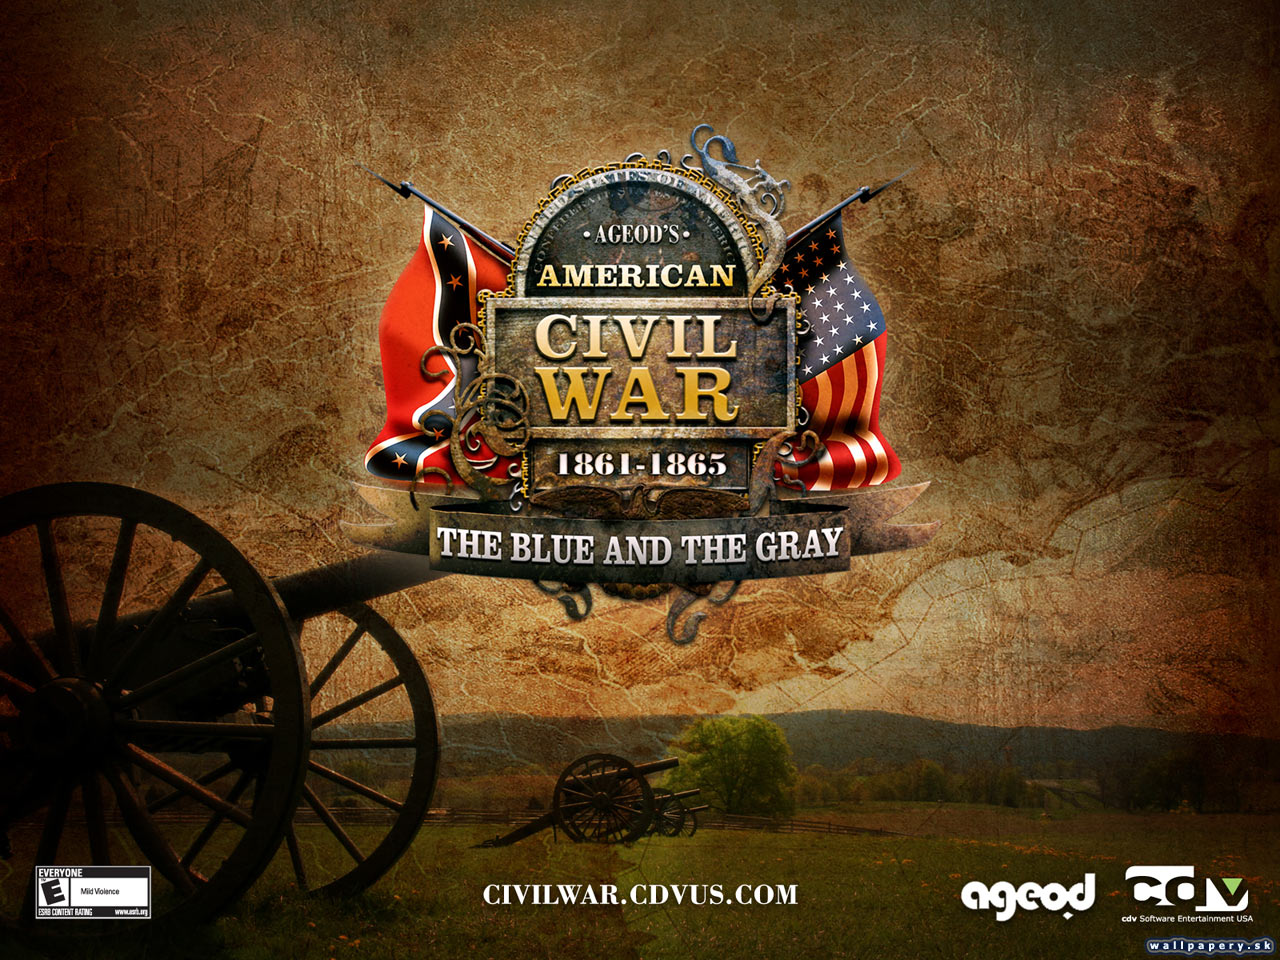 Ageod's American Civil War - The Blue and the Gray - wallpaper 7